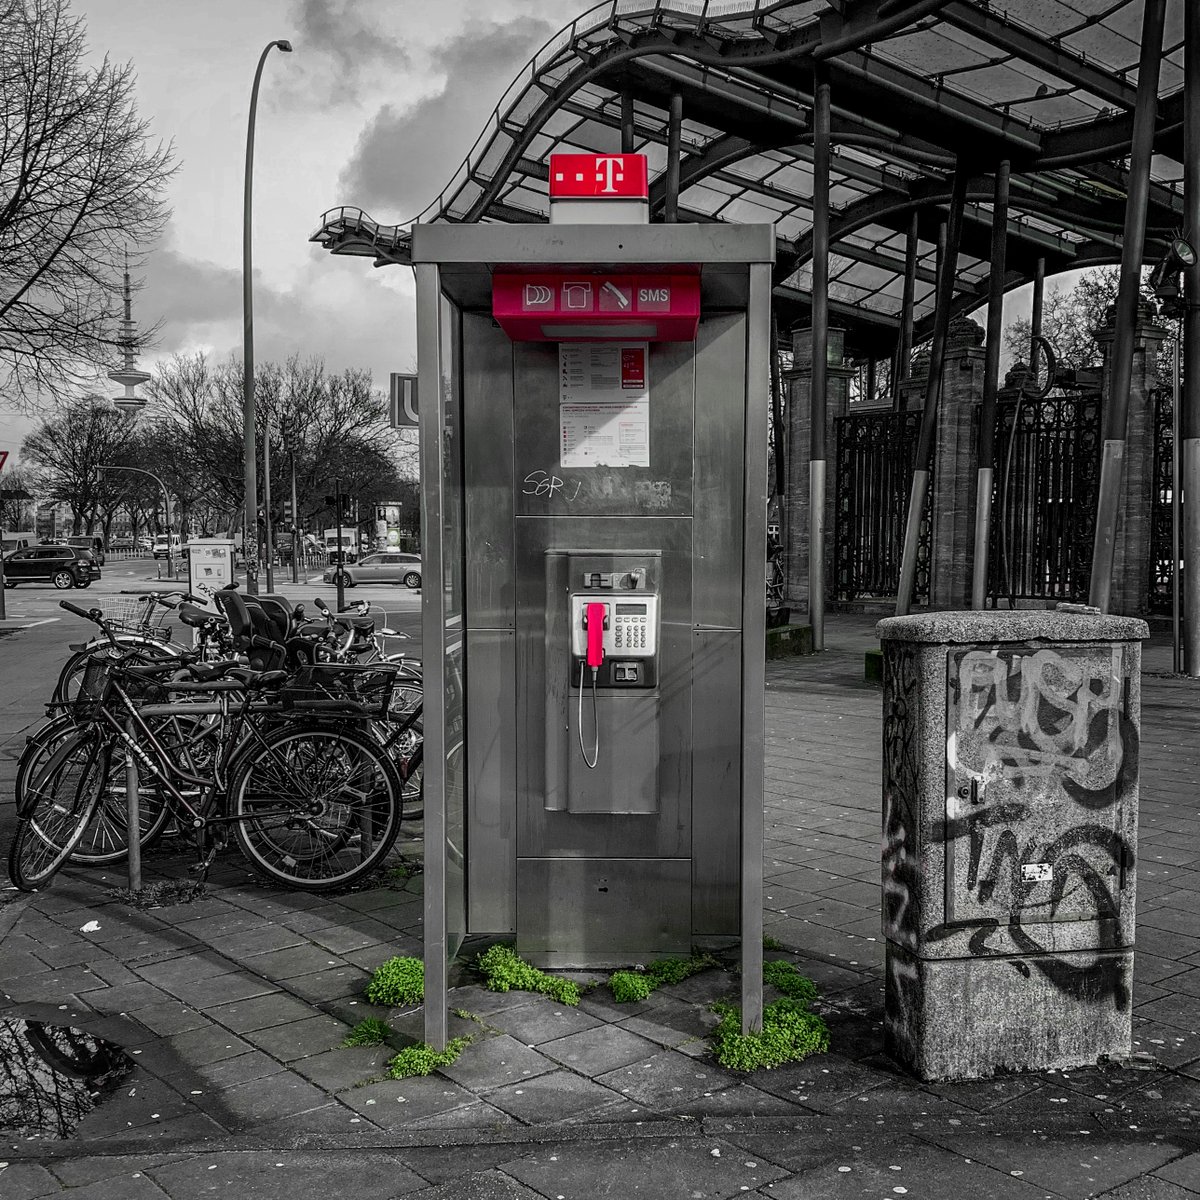 Continuing with #selectivecolor for @clr_collective
#colour_collective #RhodamineRed 
#hamburg #stpauli #reeperbahn #ilovehh #coloursplash #bnwsplash #bnwphotography #streetphotography #cityscape #architecture #streetphoto #urbanexplorers #shotoniphone @ProCamera 
Happy Weekend😎